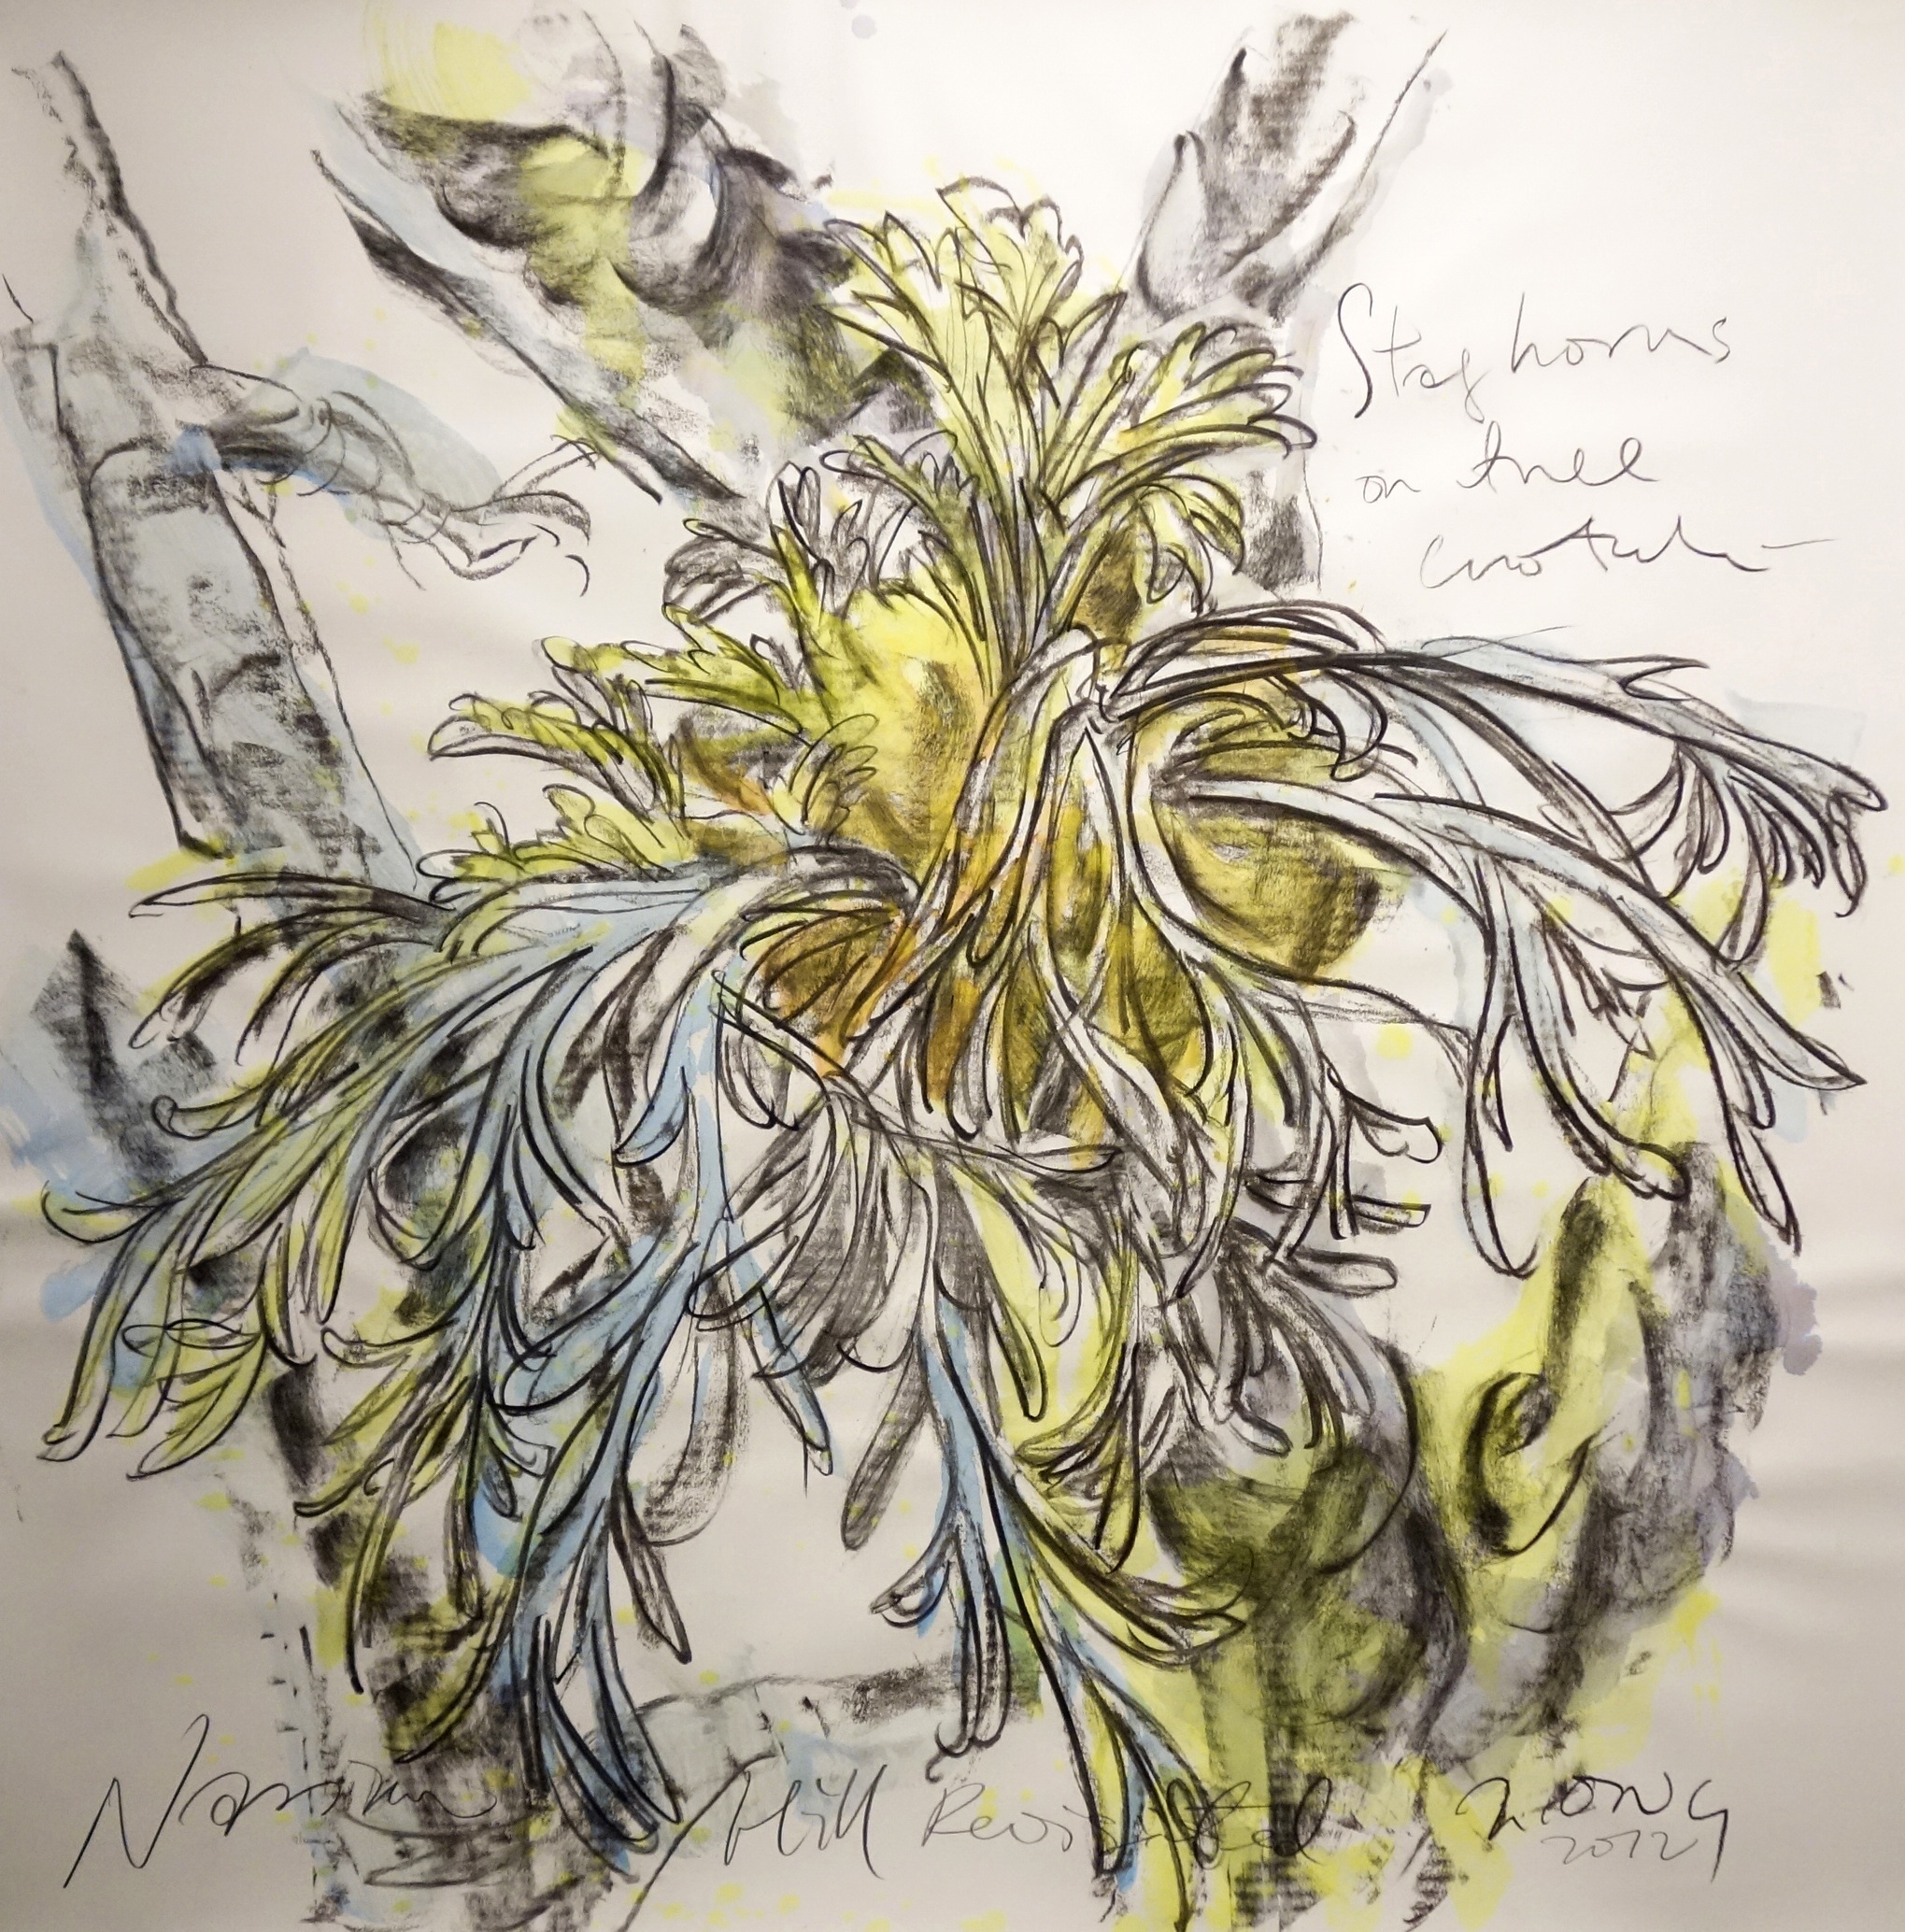   Staghorn On Tree Crotch  2013 Charcoal on paper approx. H113 x W113 cm 